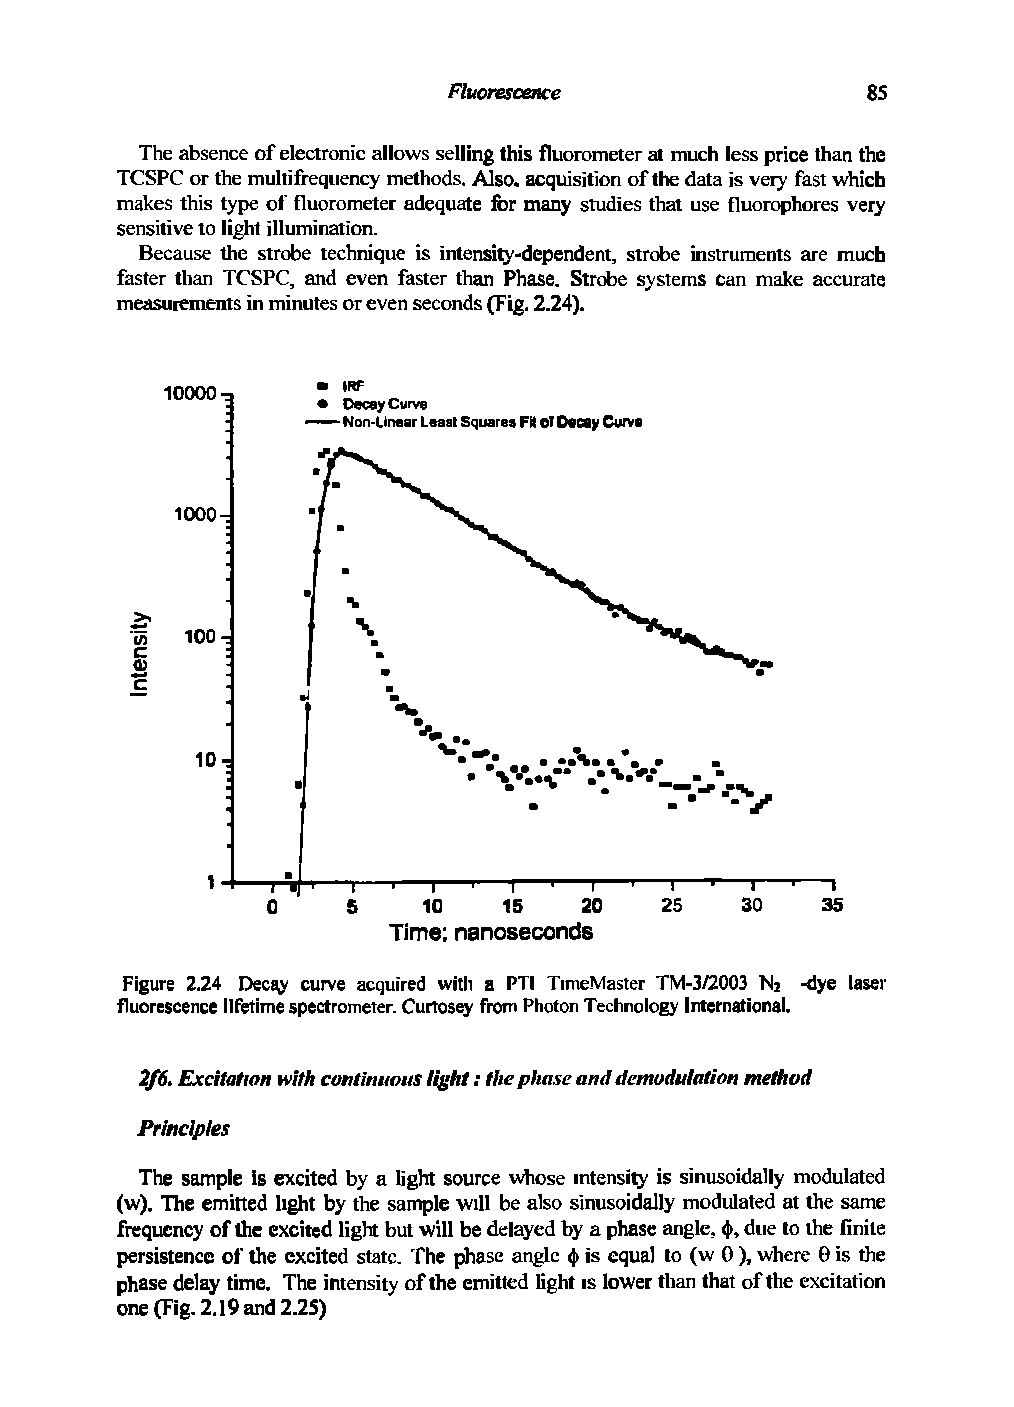 Figure 2.24 Decay curve acquired with a PTI TimeMaster TM-3/2003 Ni -dye laser fluorescence lifetime spectrometer. Curtosey from Photon Technology International.